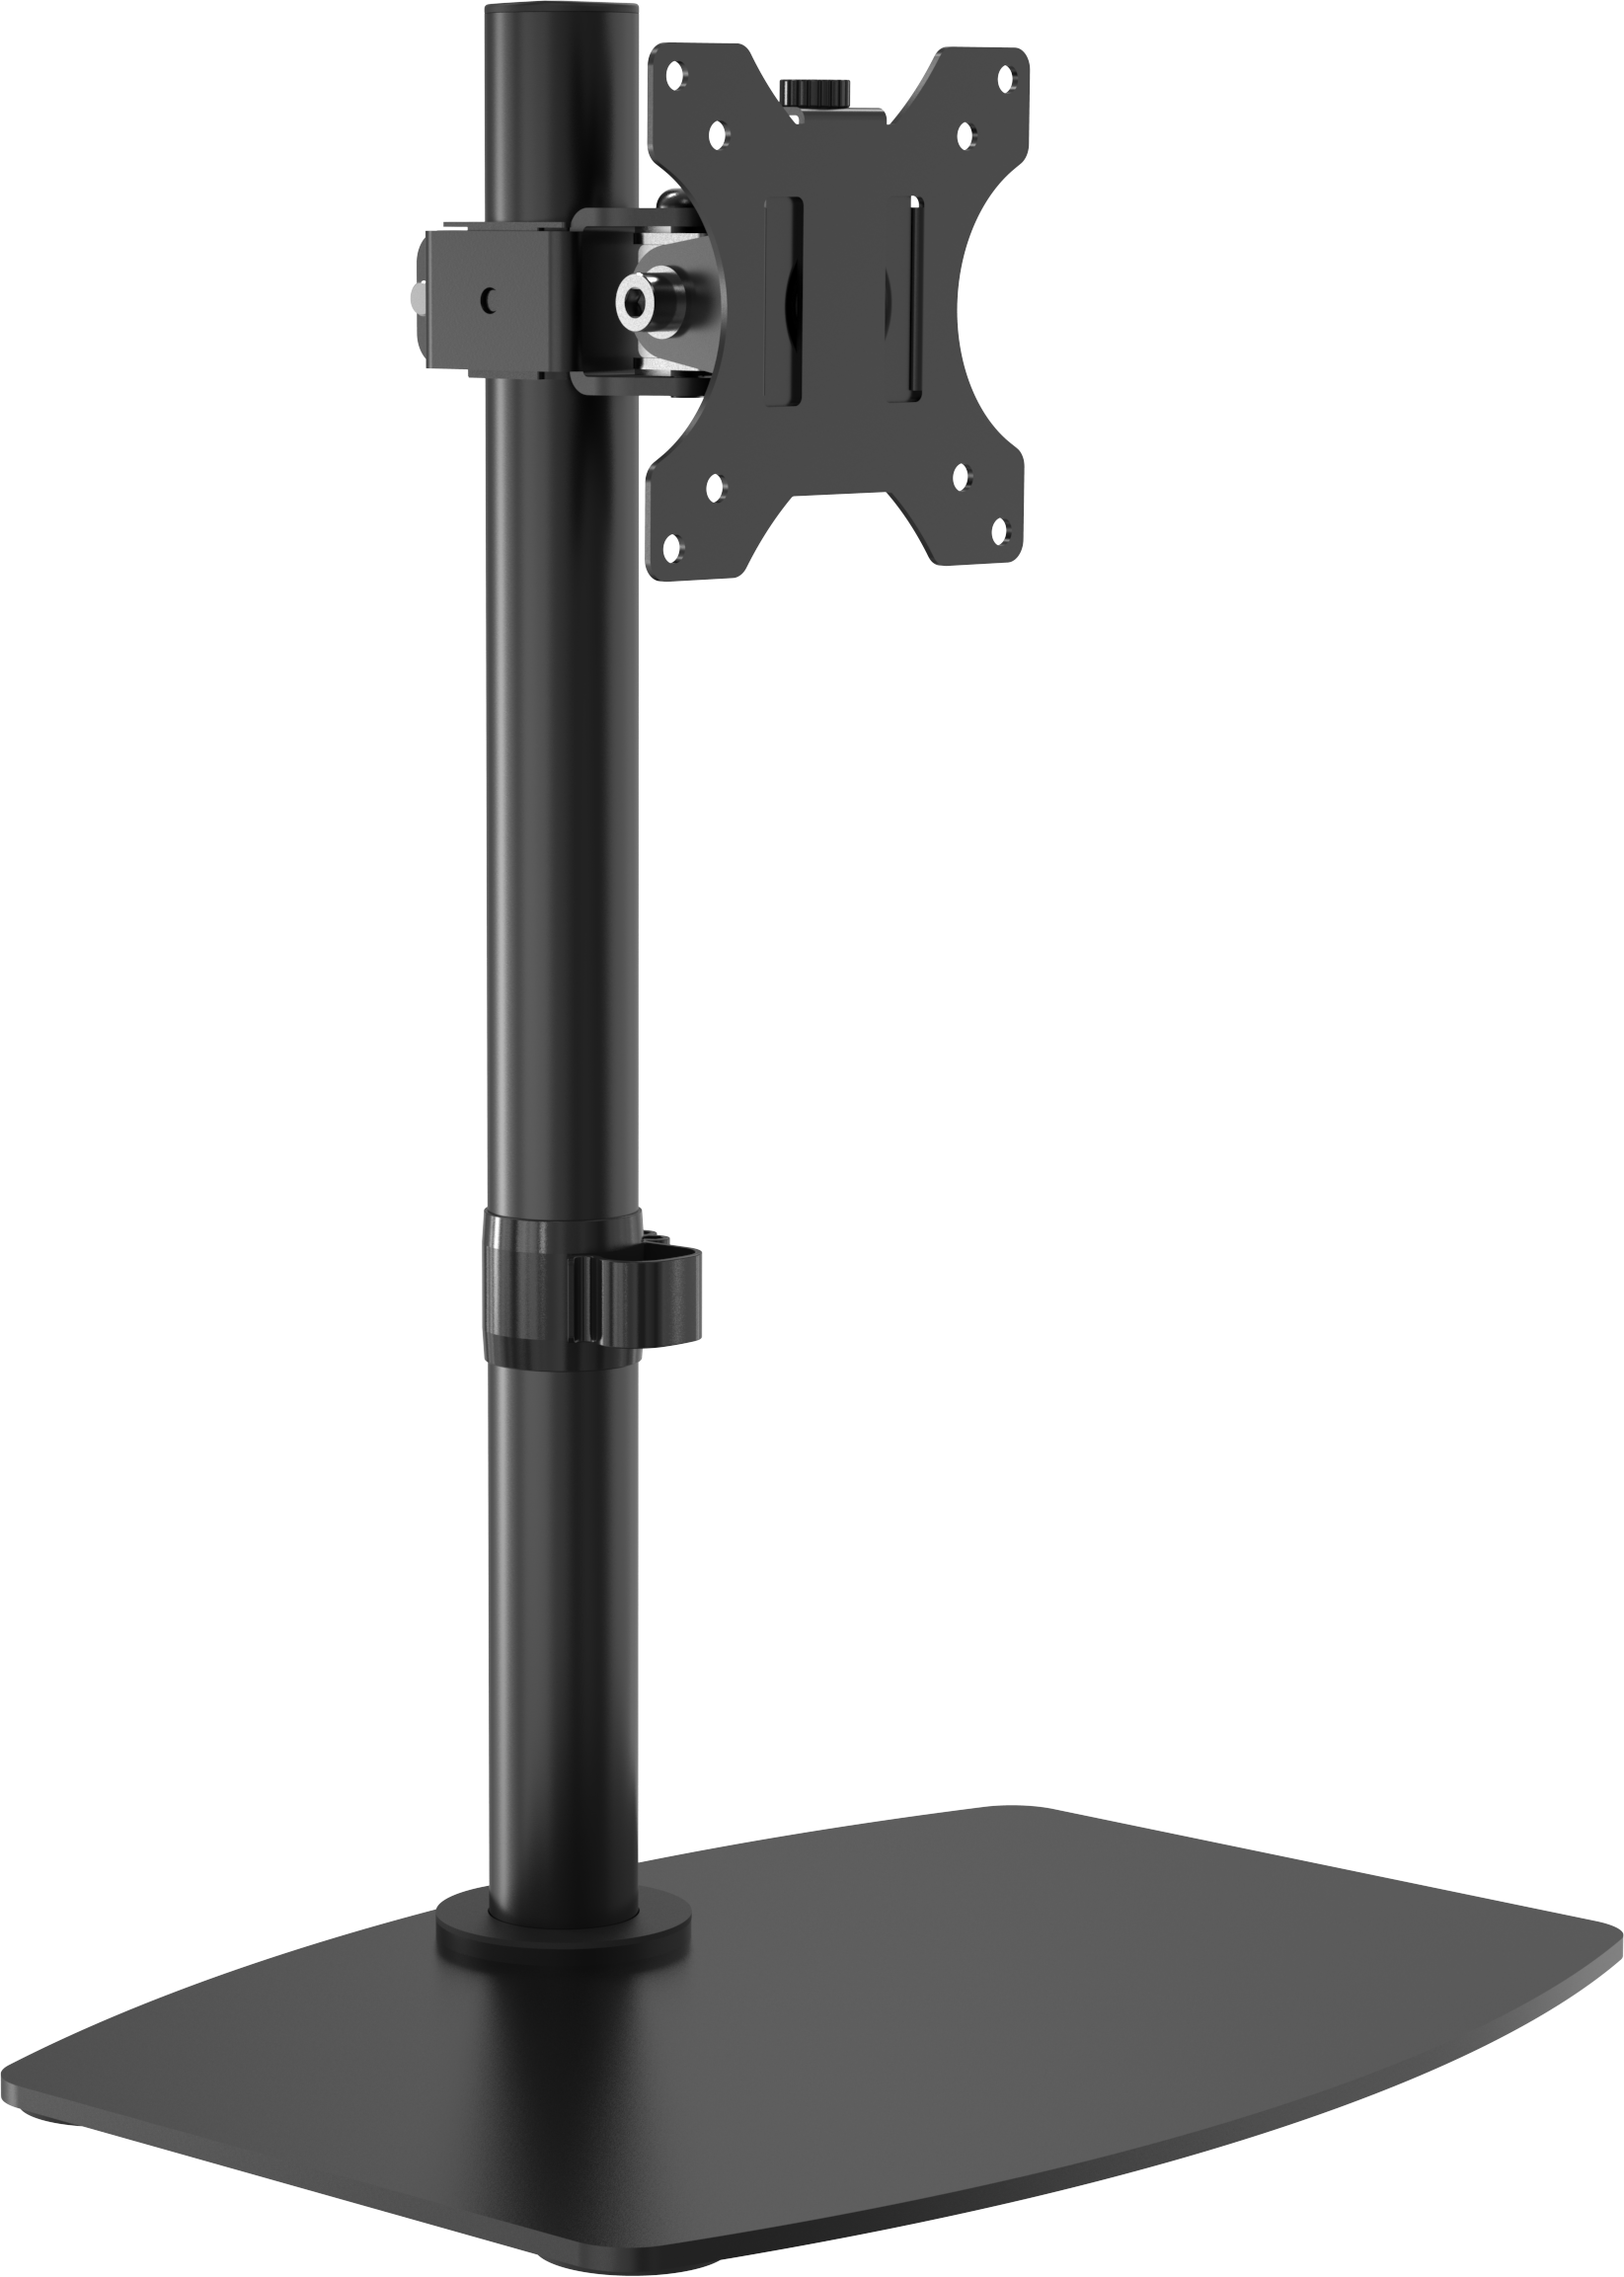 An image showing Monitor Desk Stand 100×100